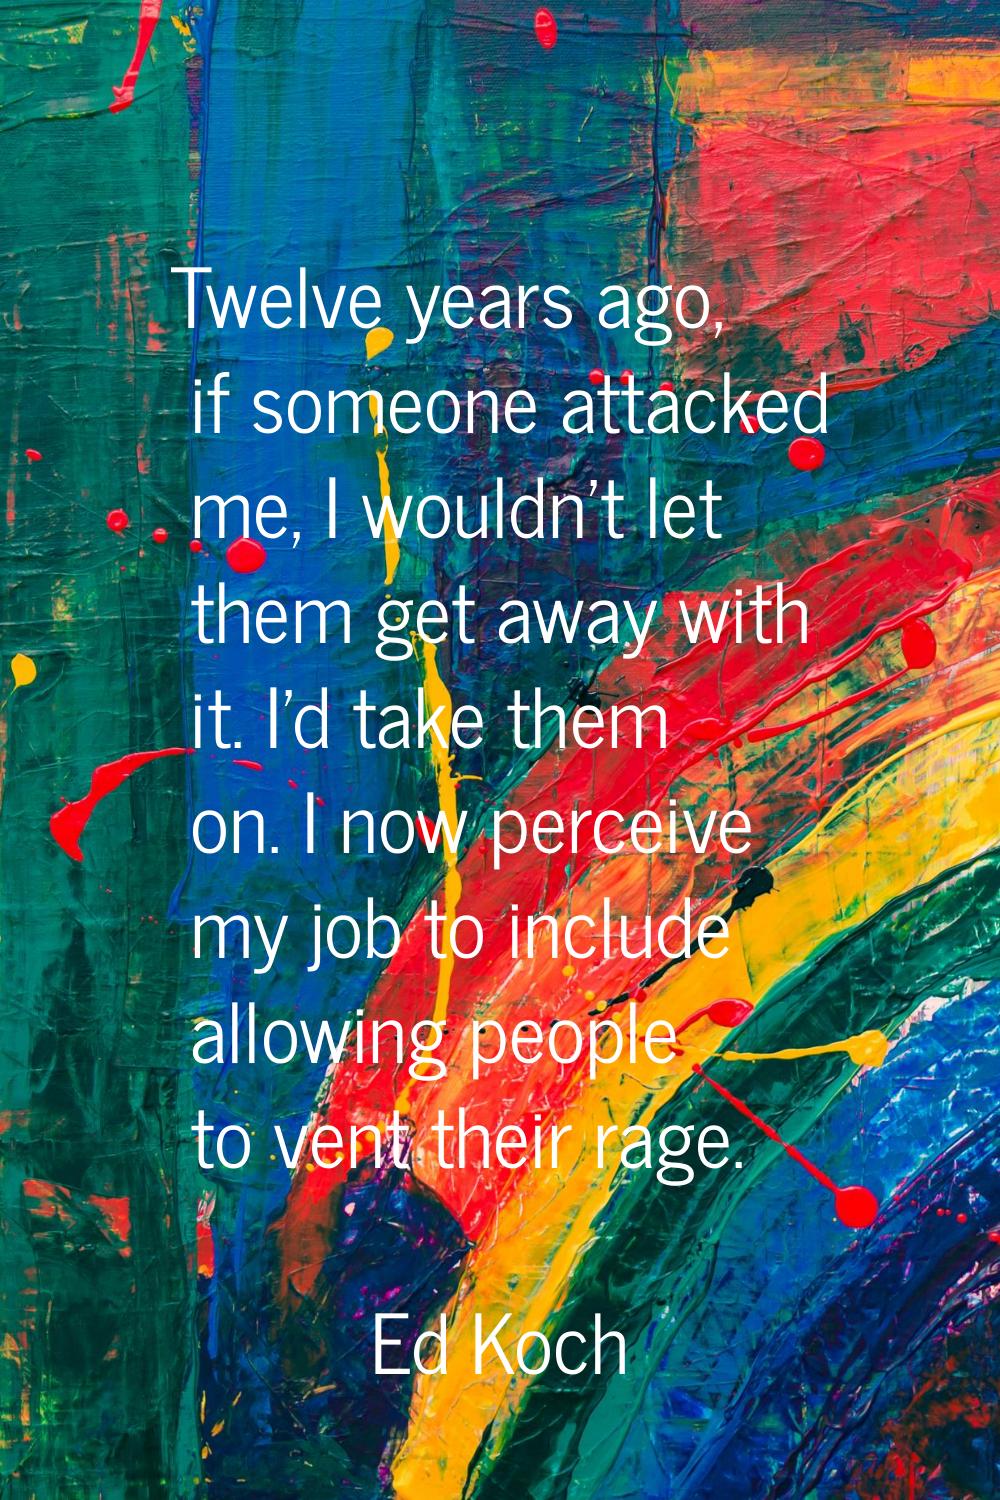 Twelve years ago, if someone attacked me, I wouldn't let them get away with it. I'd take them on. I